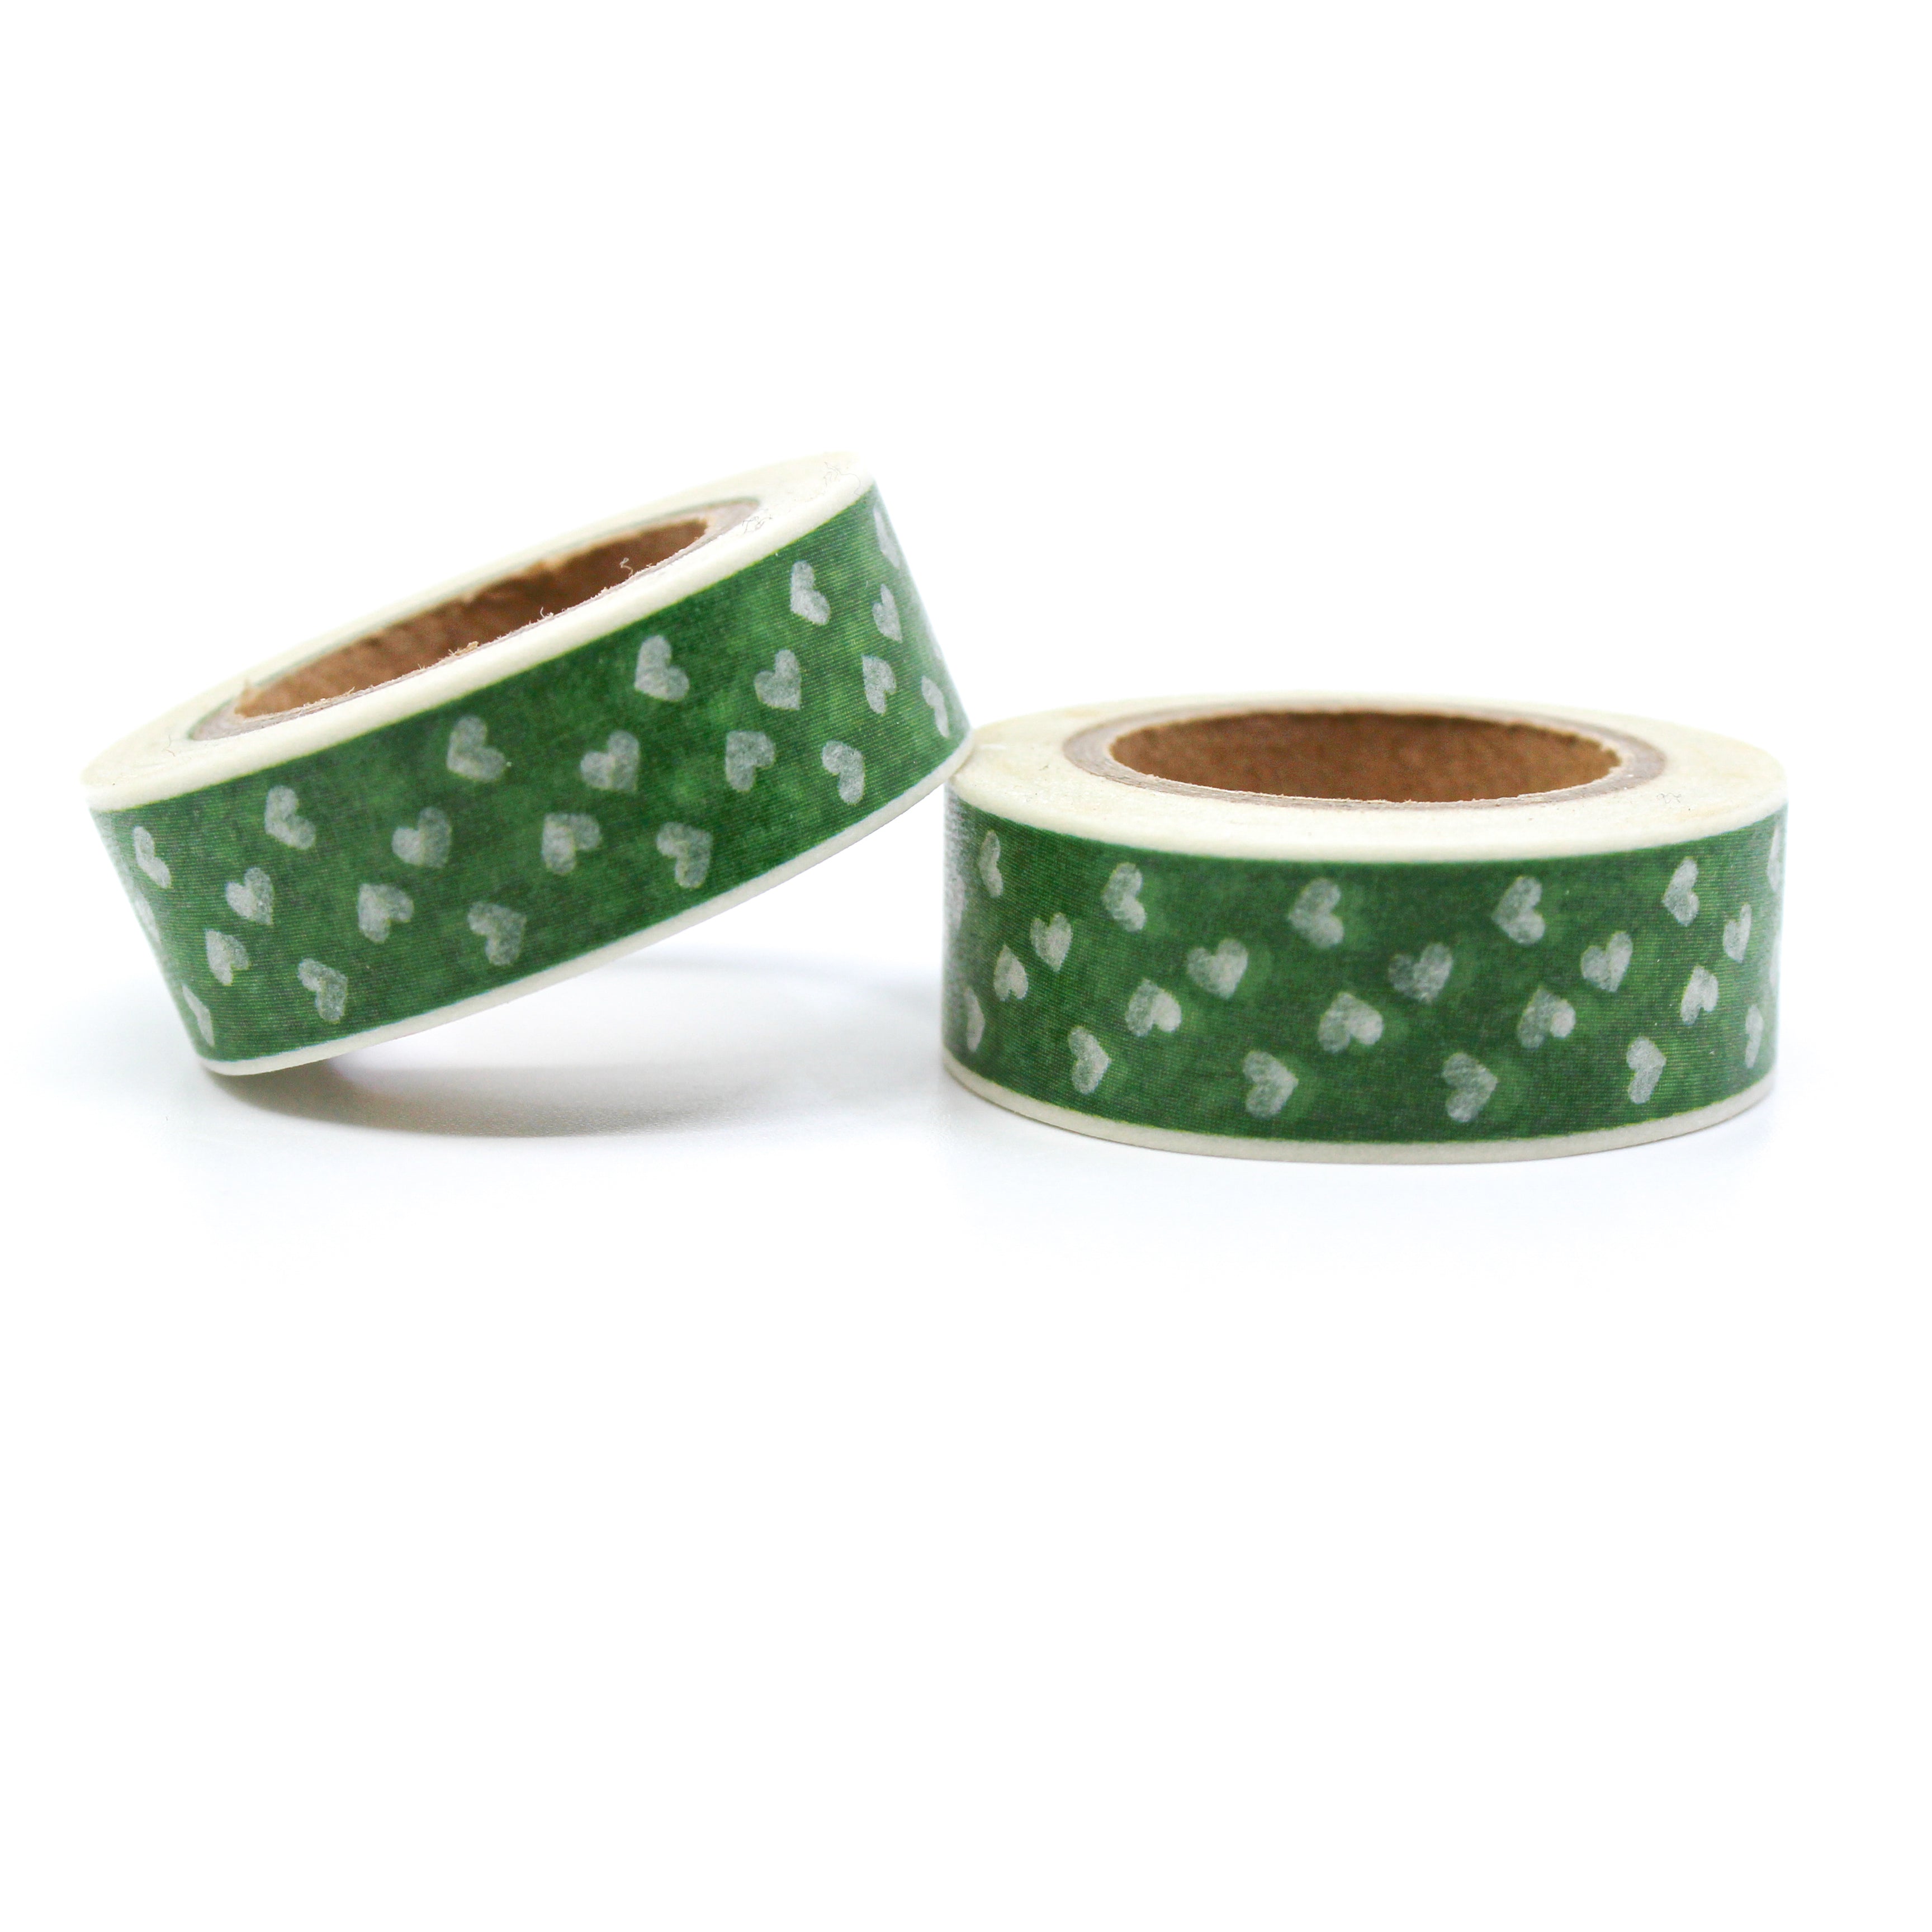 This is a green multi-hearts for Journal Supplies, Scrapbooking washi tapes rom BBB Supplies Craft Shop